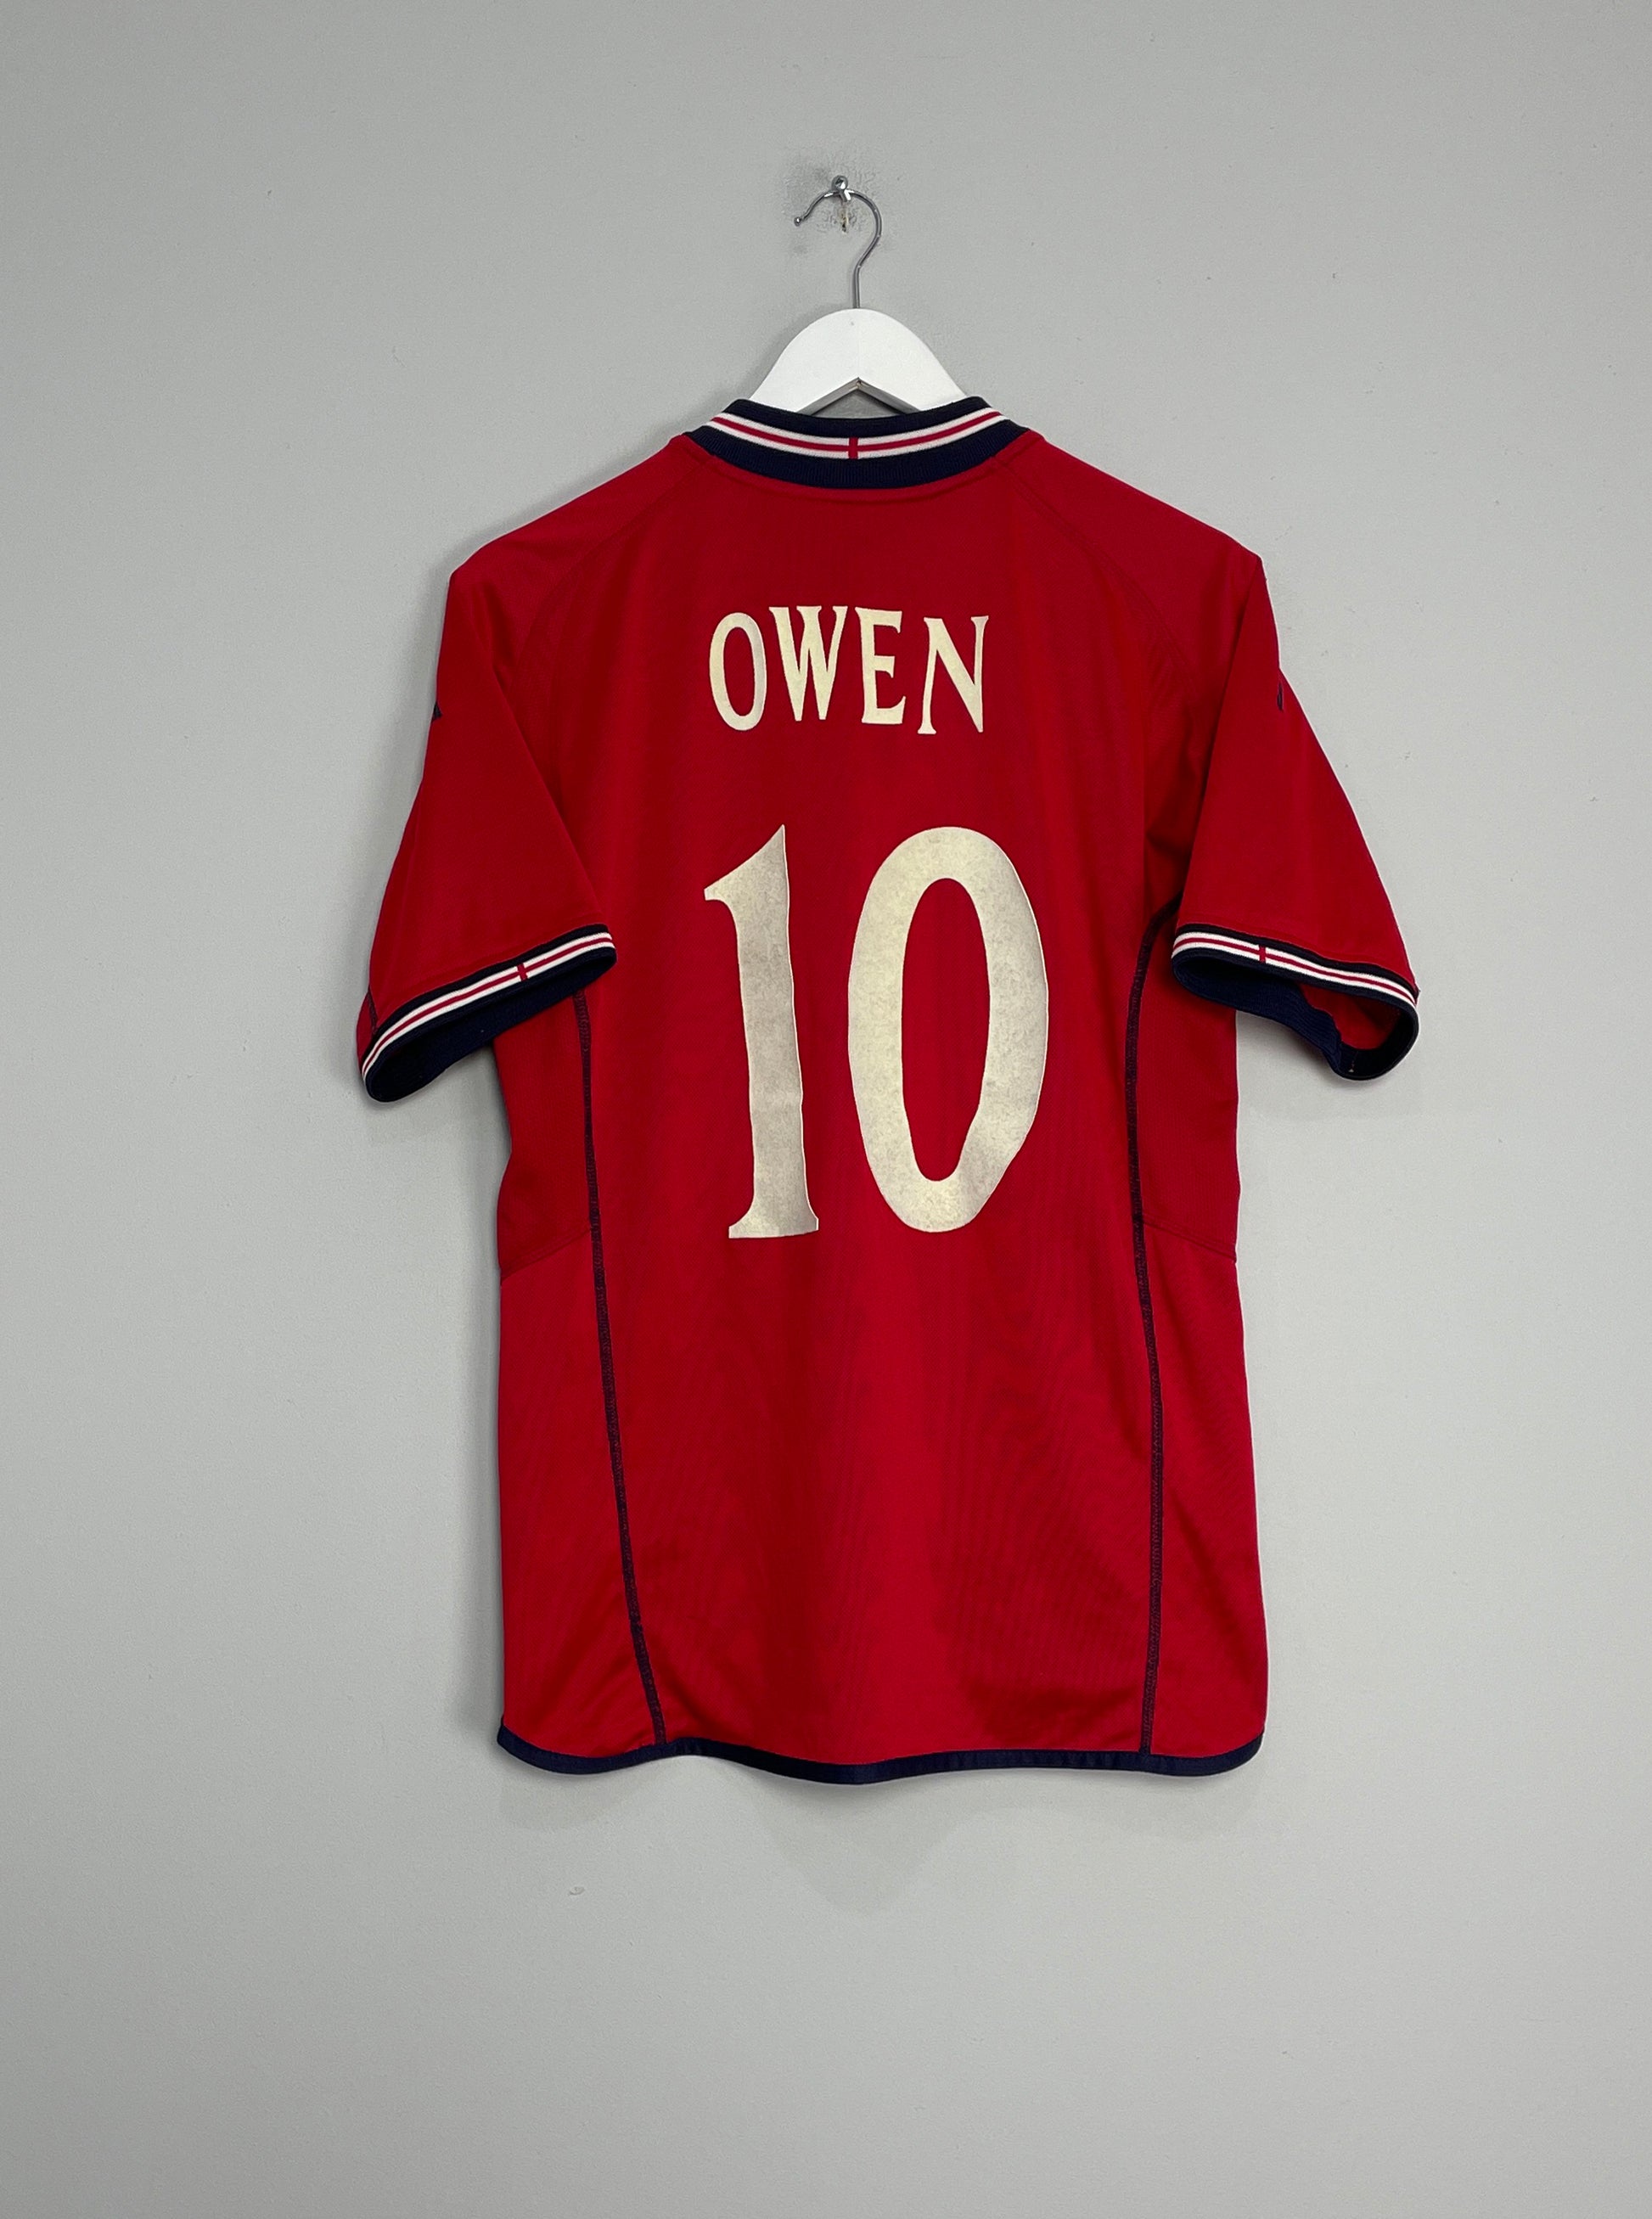 Image of the England Owen shirt from the 2002/04 season